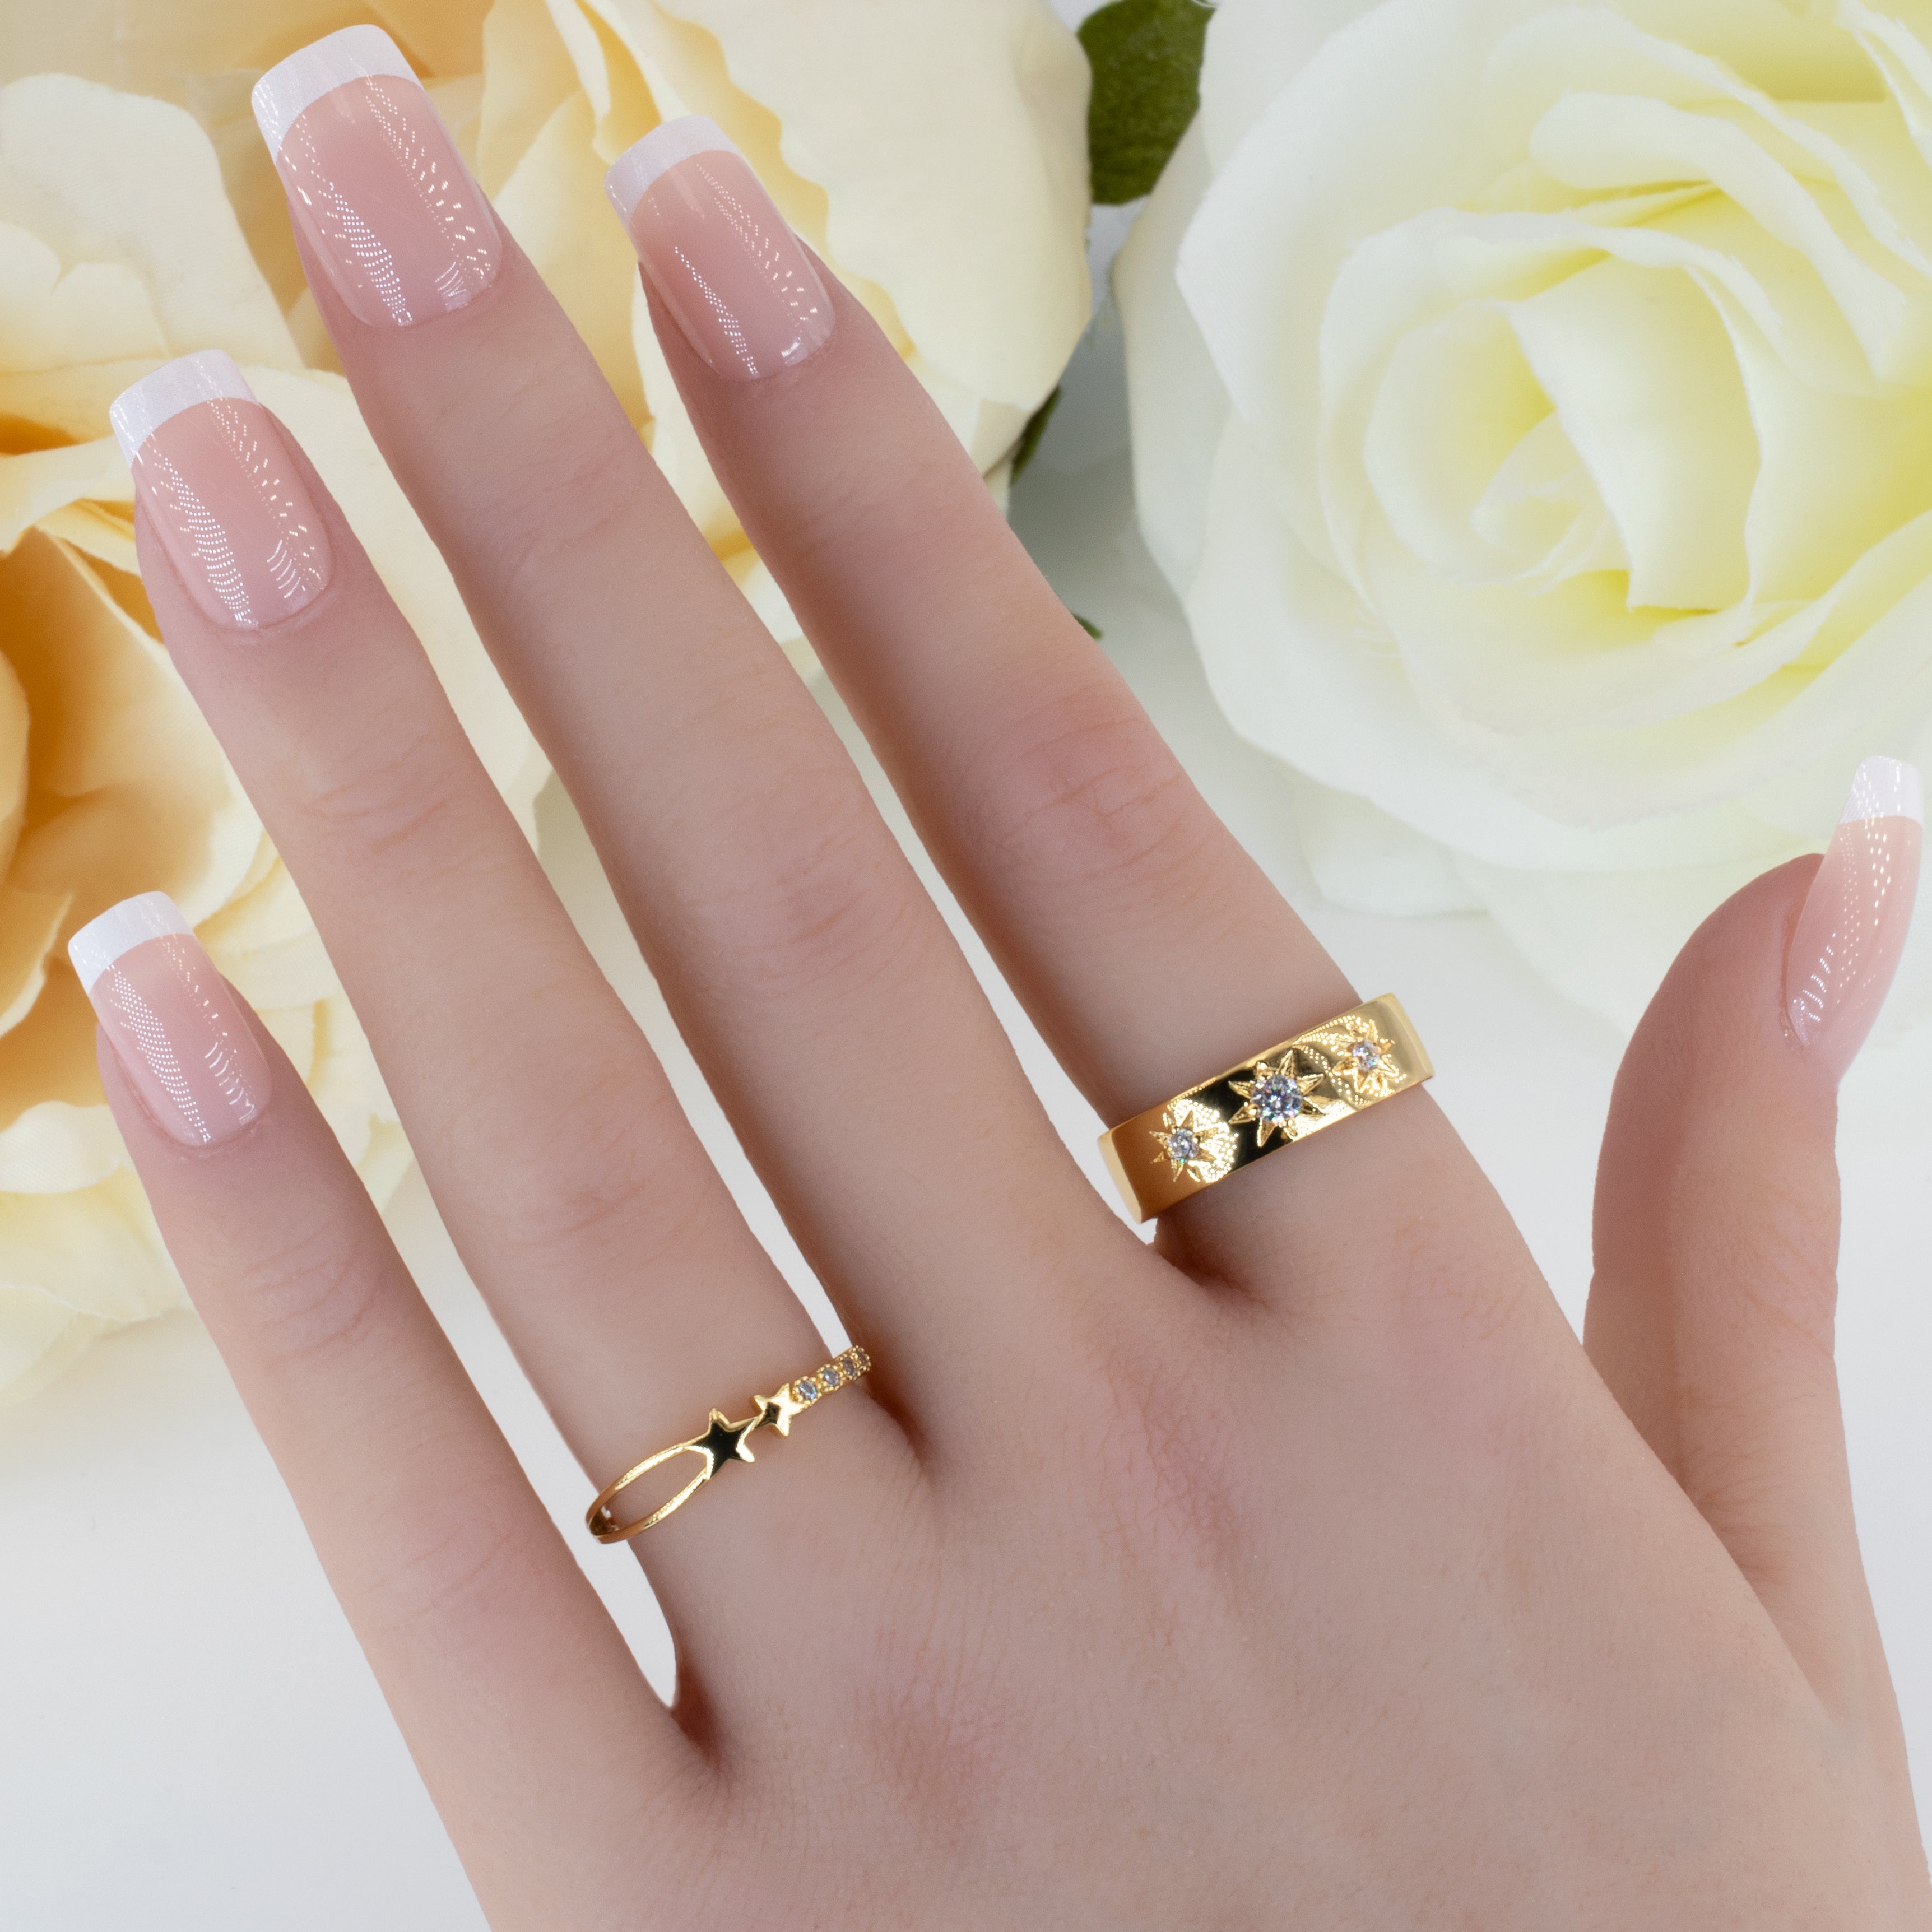 Adjustable 999 Gold Twist Thin Gold Ring Band For Couples Real 100% Pure  Fine Jewelry Lovers Gift From Yujia05, $9.15 | DHgate.Com